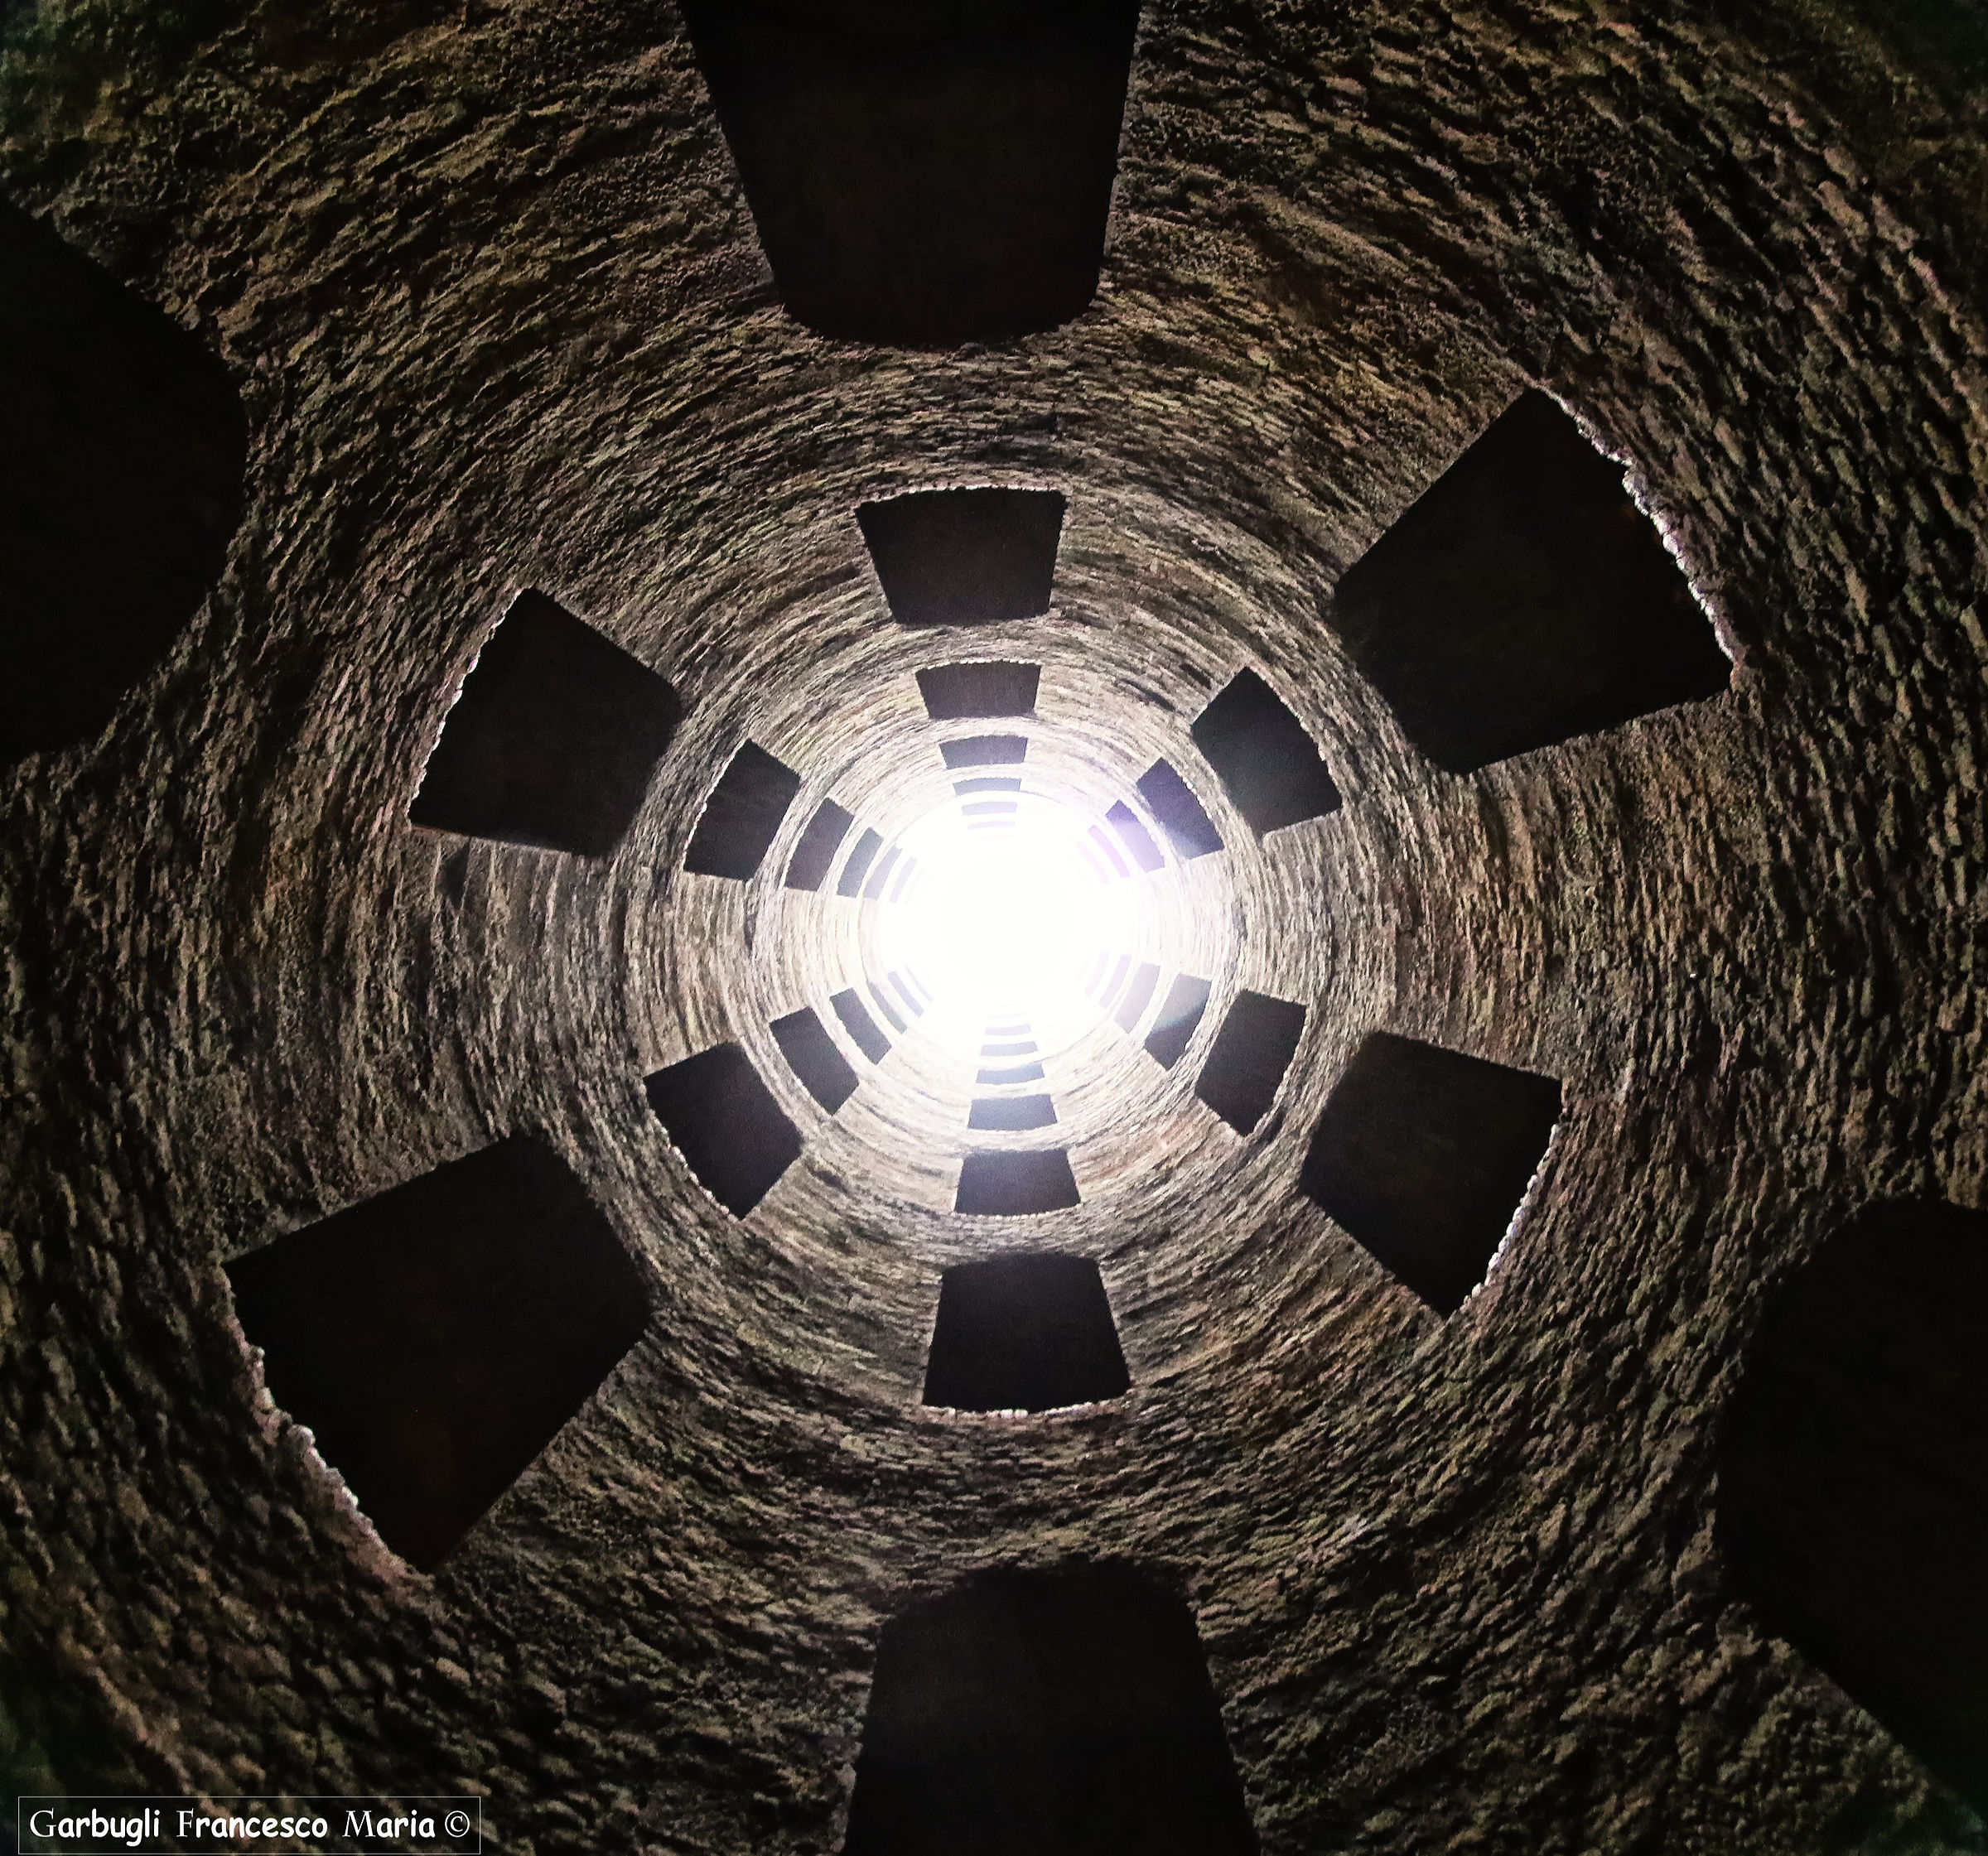 Geometries of the St. Patrick's Well...